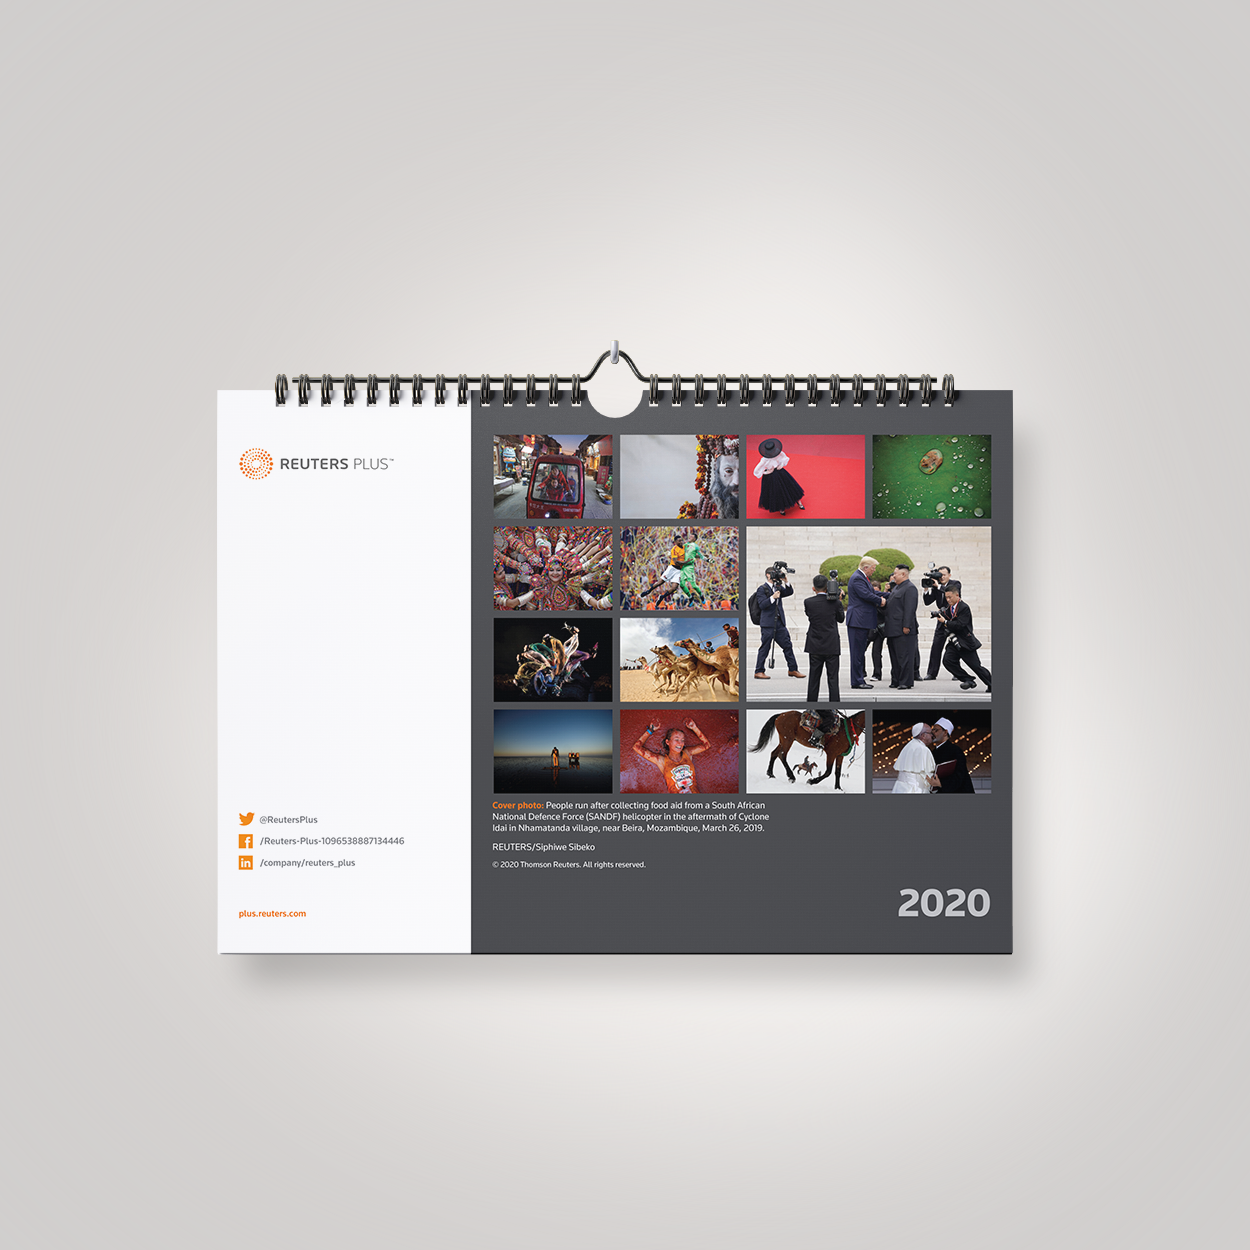 Reuters calendar design and printing services